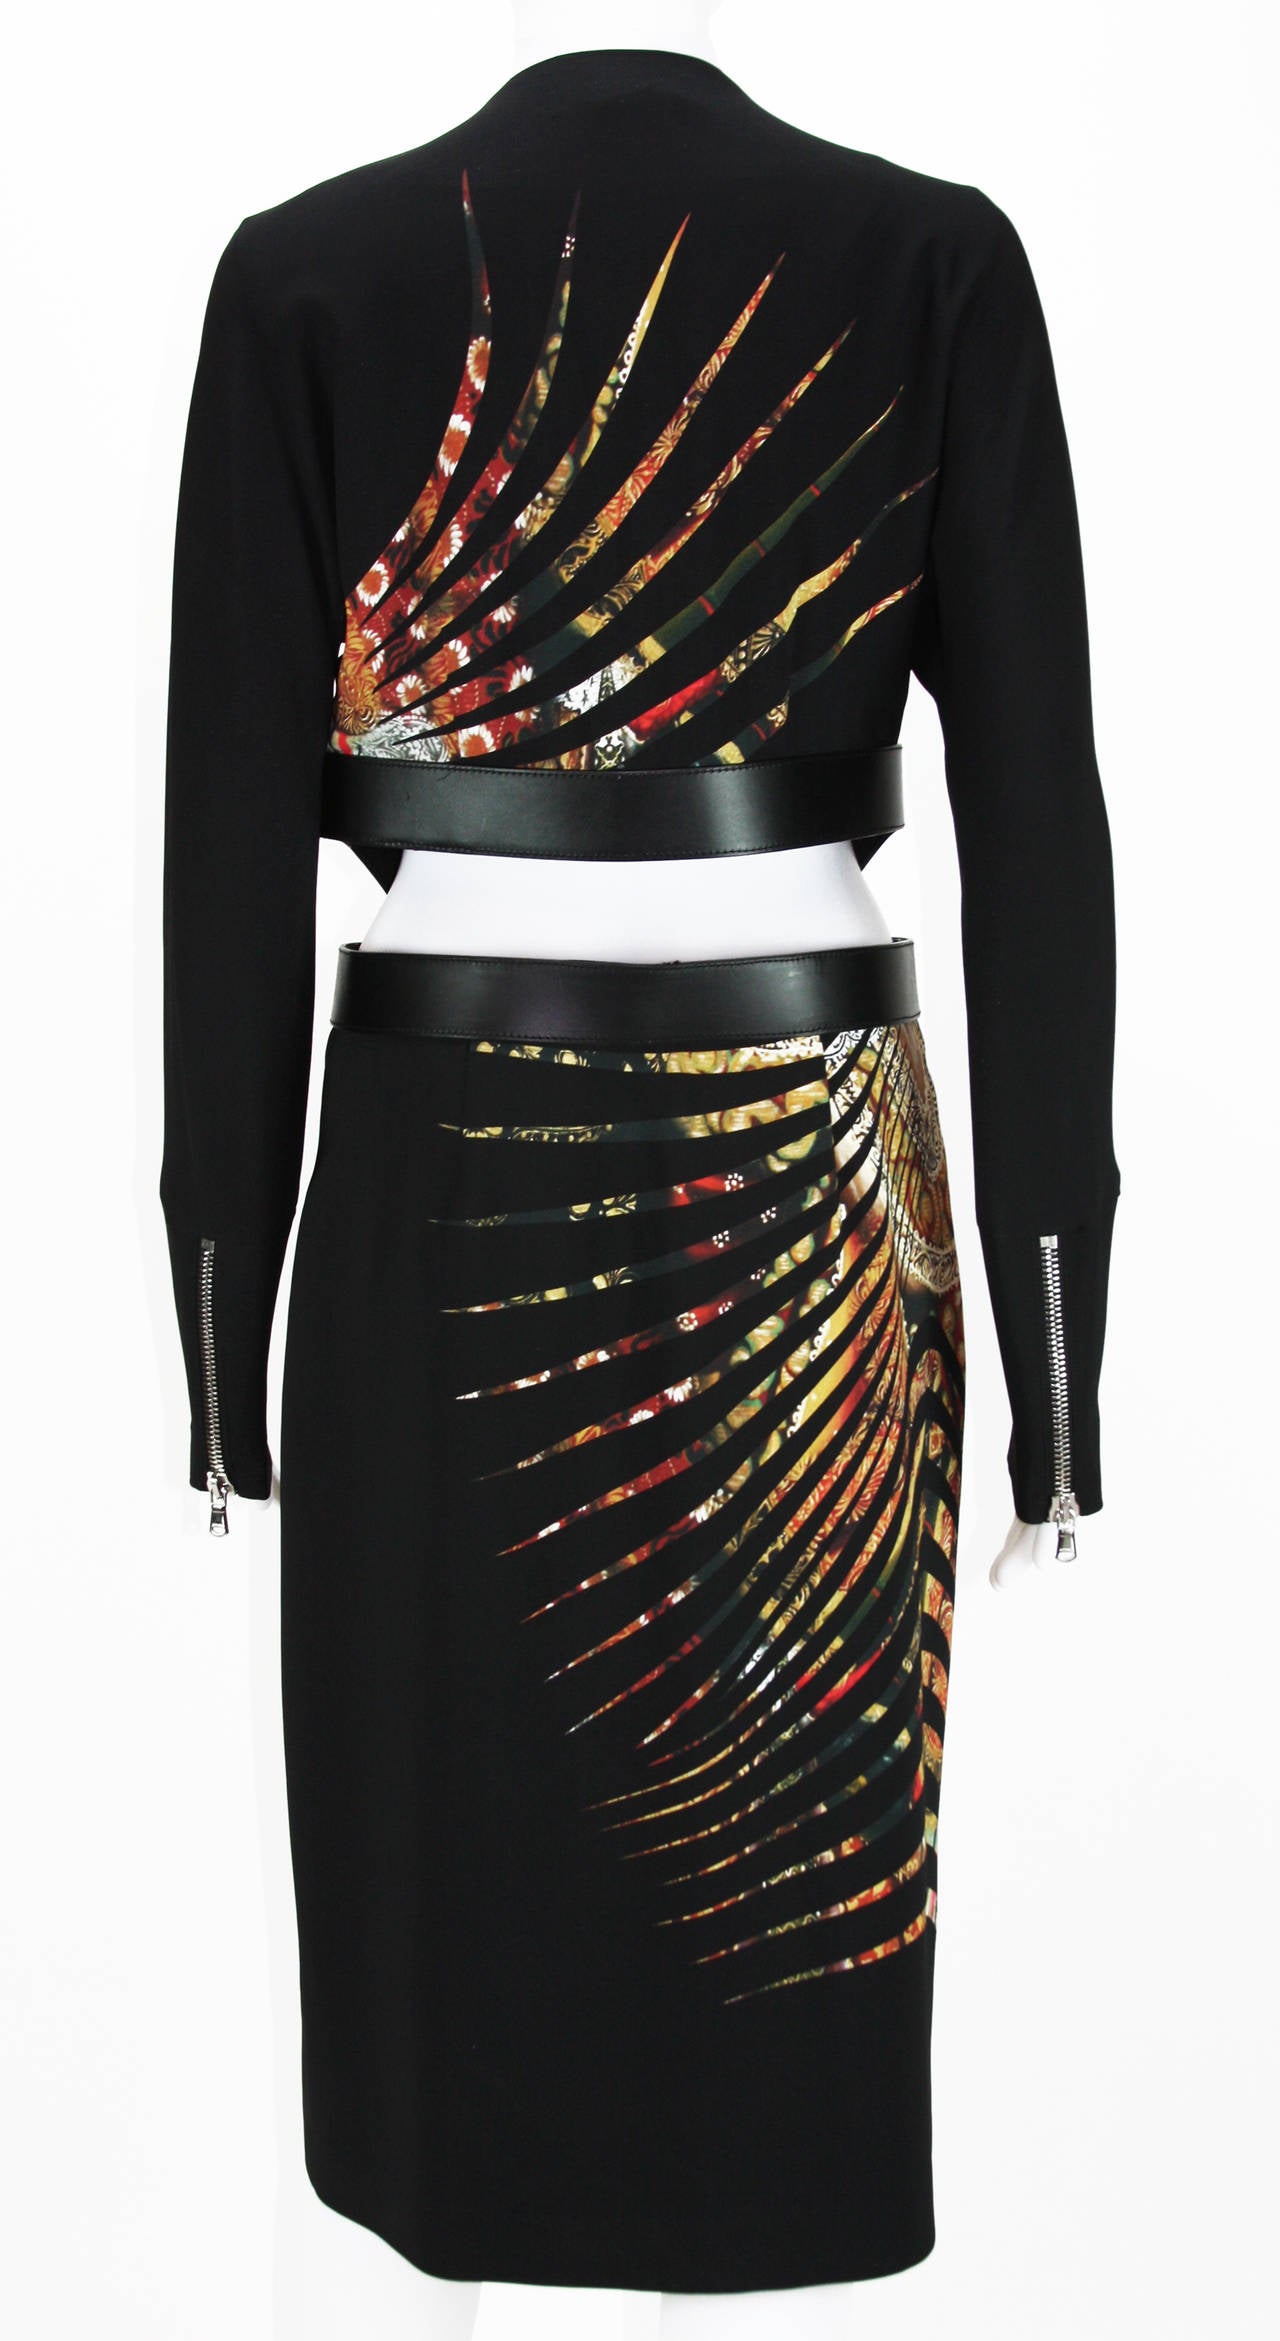 NEW ETRO RUNWAY CUT OUT DRESS WITH LEATHER BELT

ITALIAN SIZE 46 – US 10
COLORS – BLACK, MULTICOLOR
CUT-OUT WAIST WITH LEATHER BELT 
DOUBLE CLOSURE AT FRONT – ZIPPER + SNAP BUTTONS
SLEEVES WITH ZIPPER ON CUFFS
FULLY LINED
96% VISCOSA, 4%